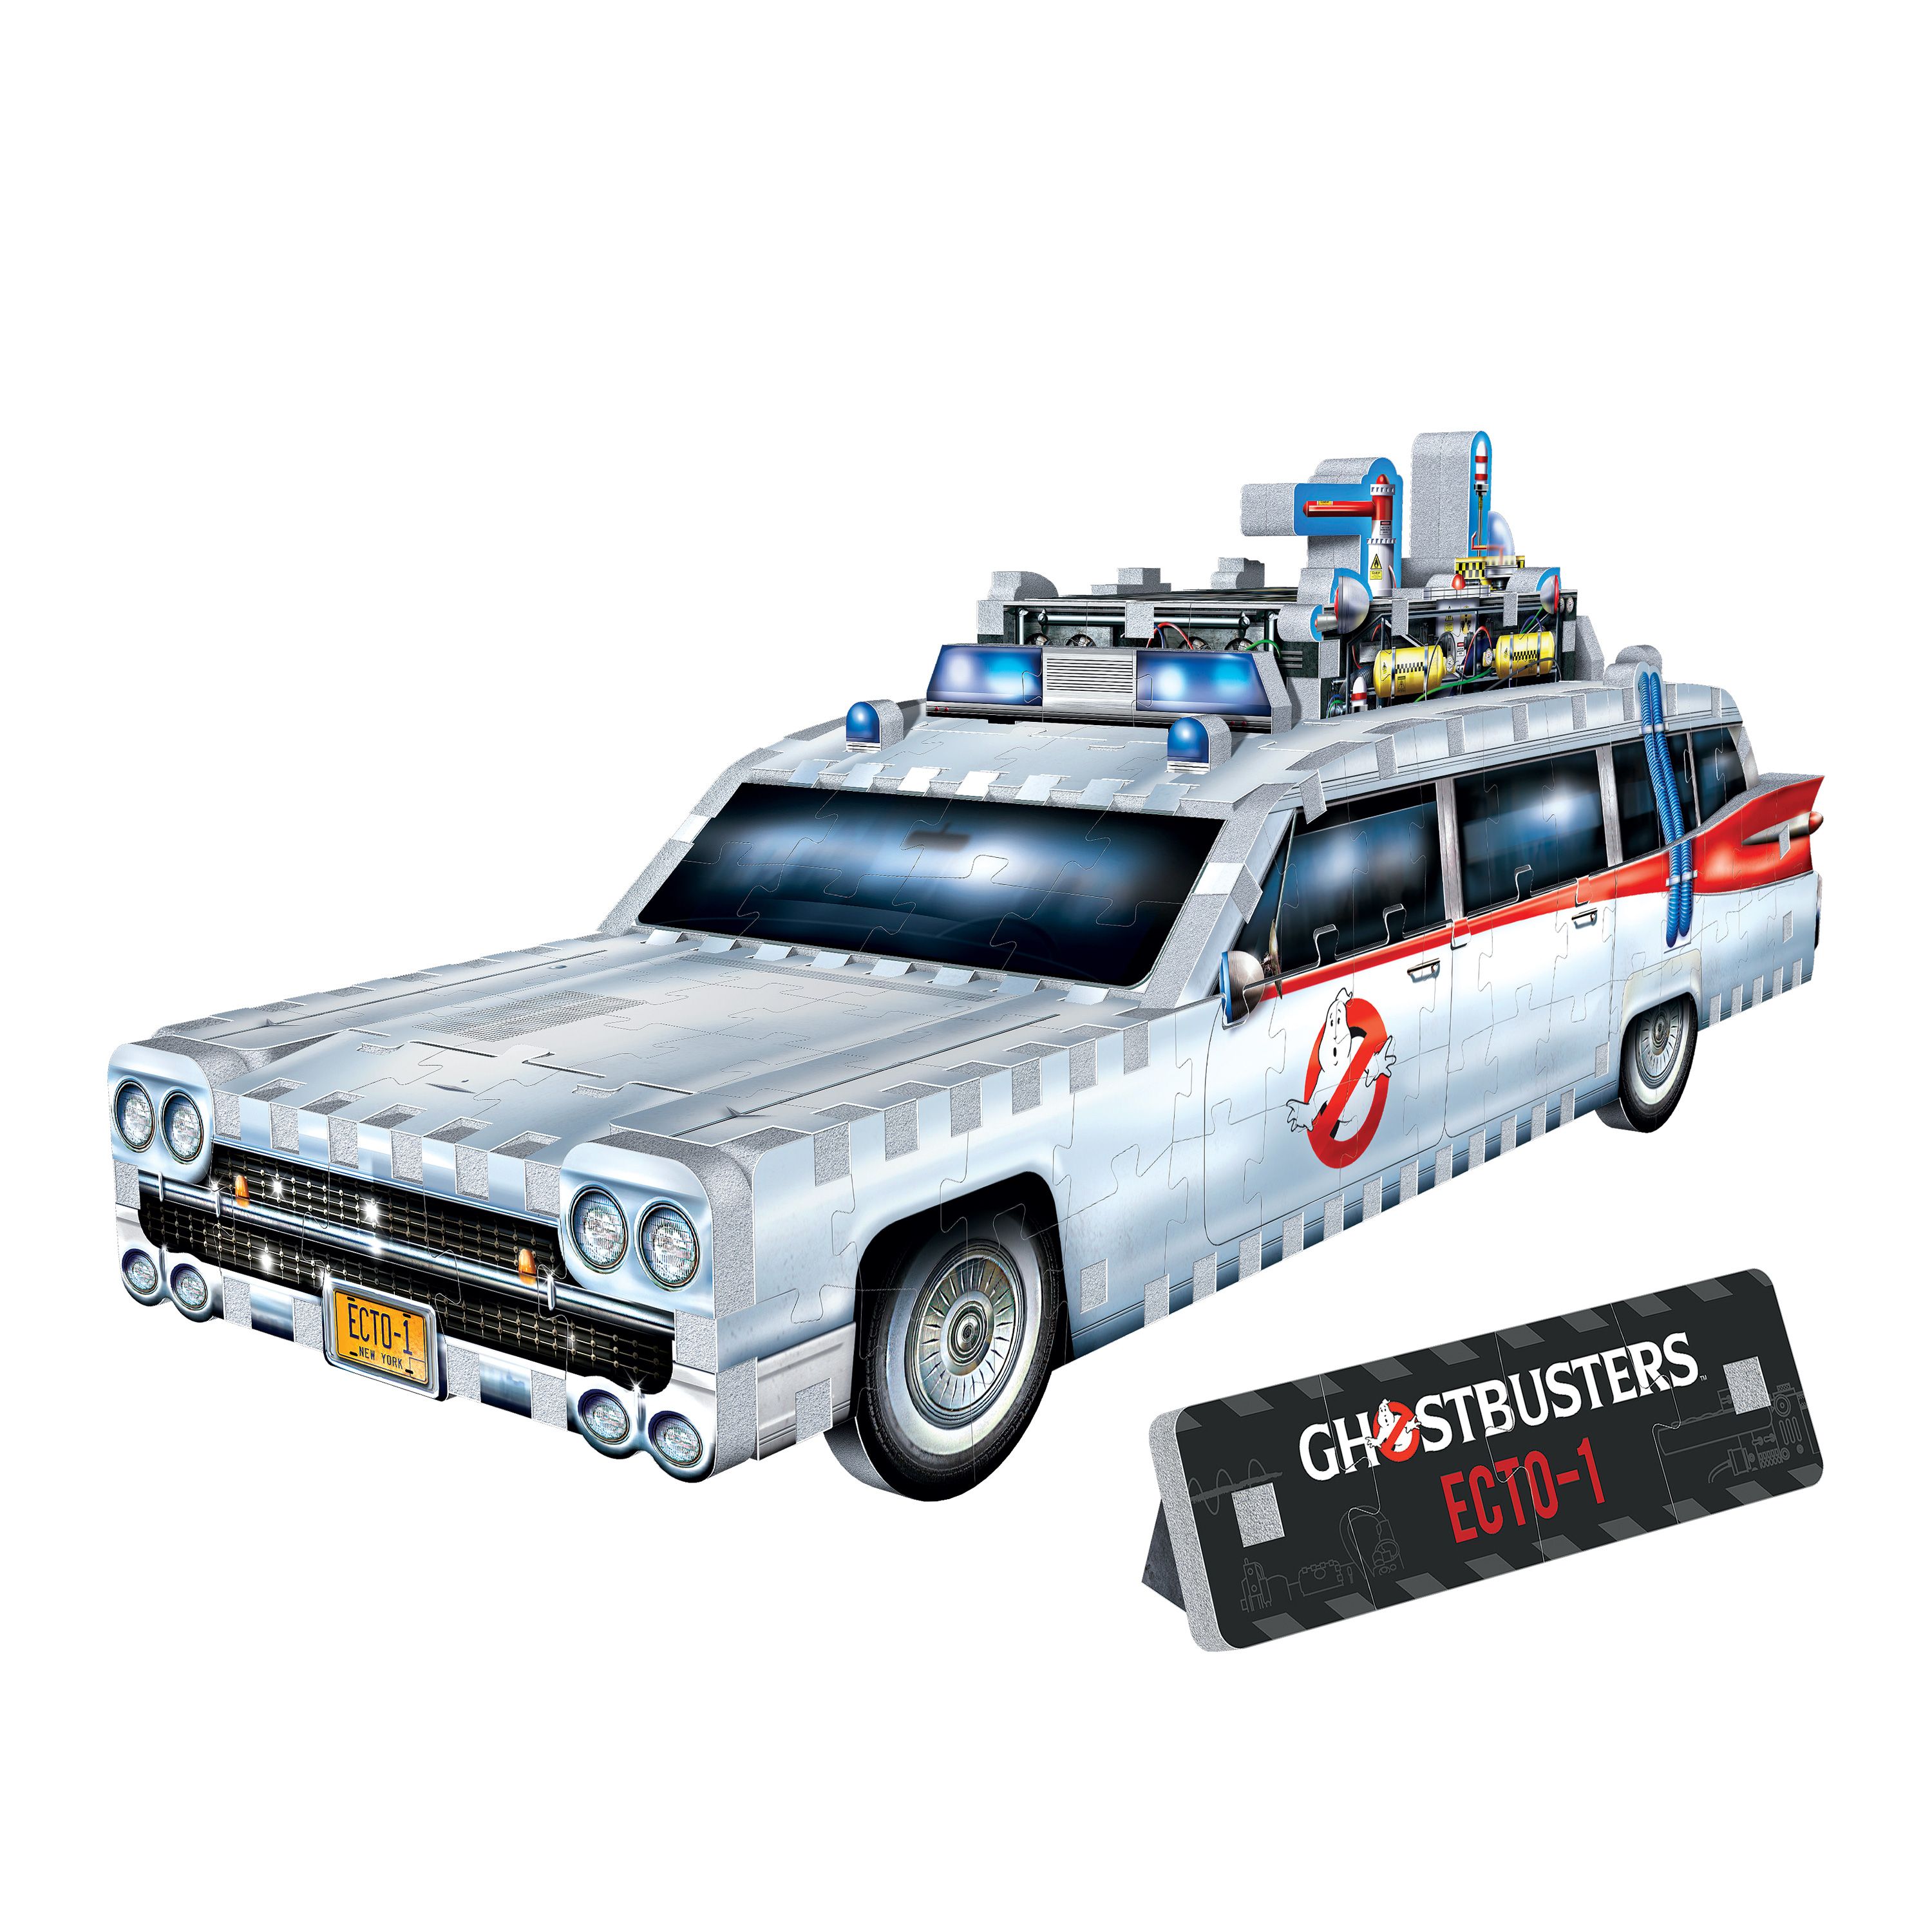 ECTO-1 - Ghostbusters (280Teile) - 3D-Puzzle